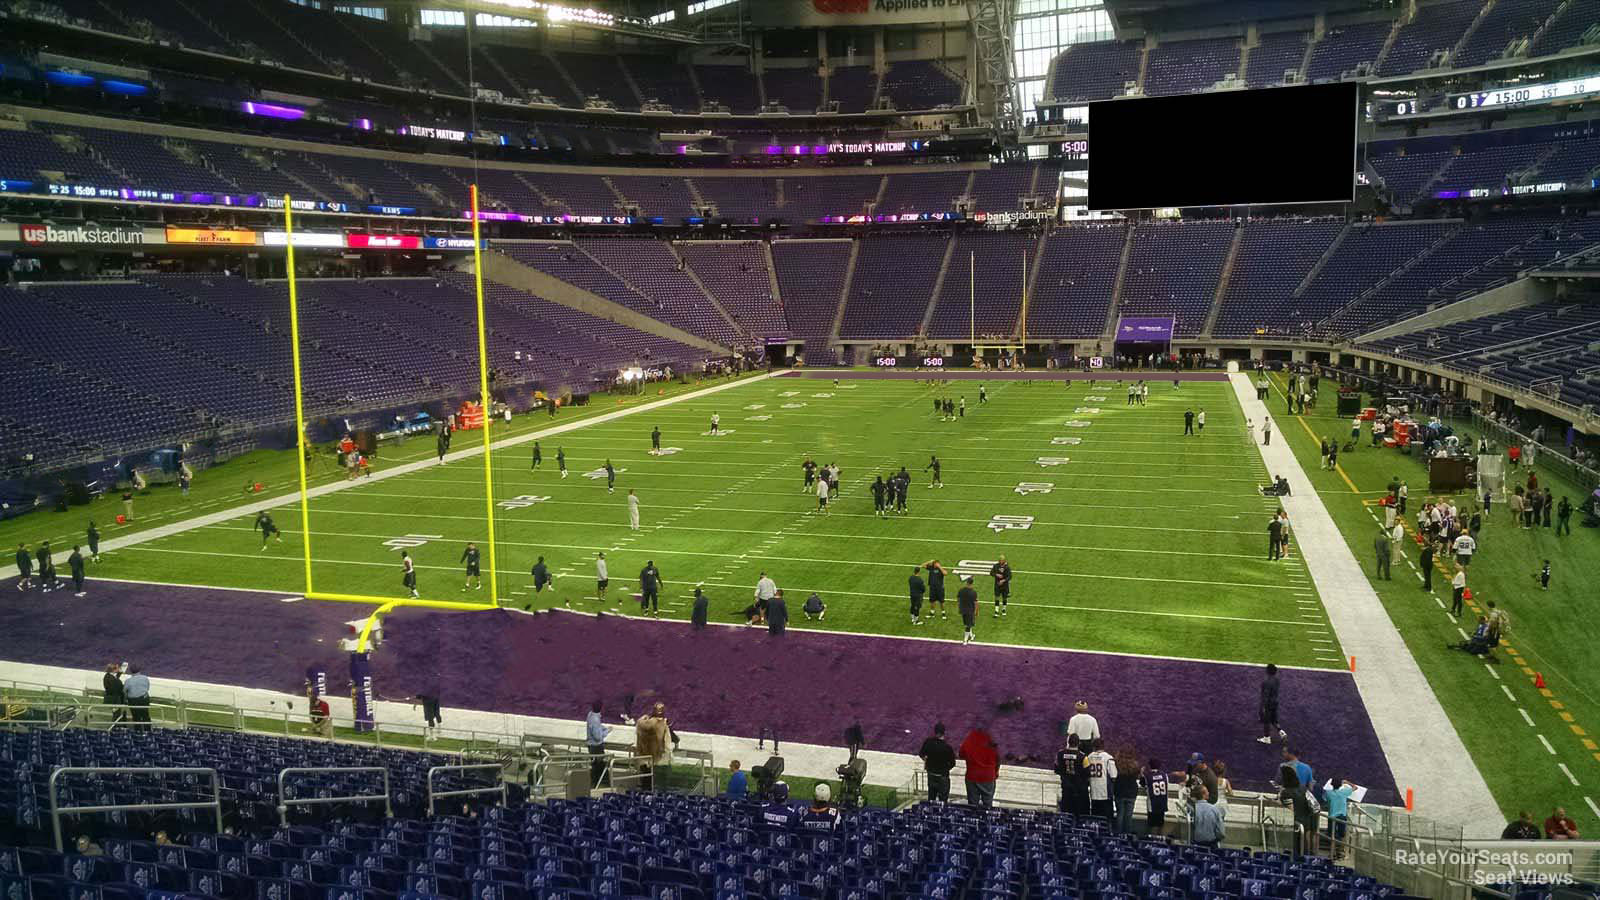 section 140, row 24 seat view  for football - u.s. bank stadium